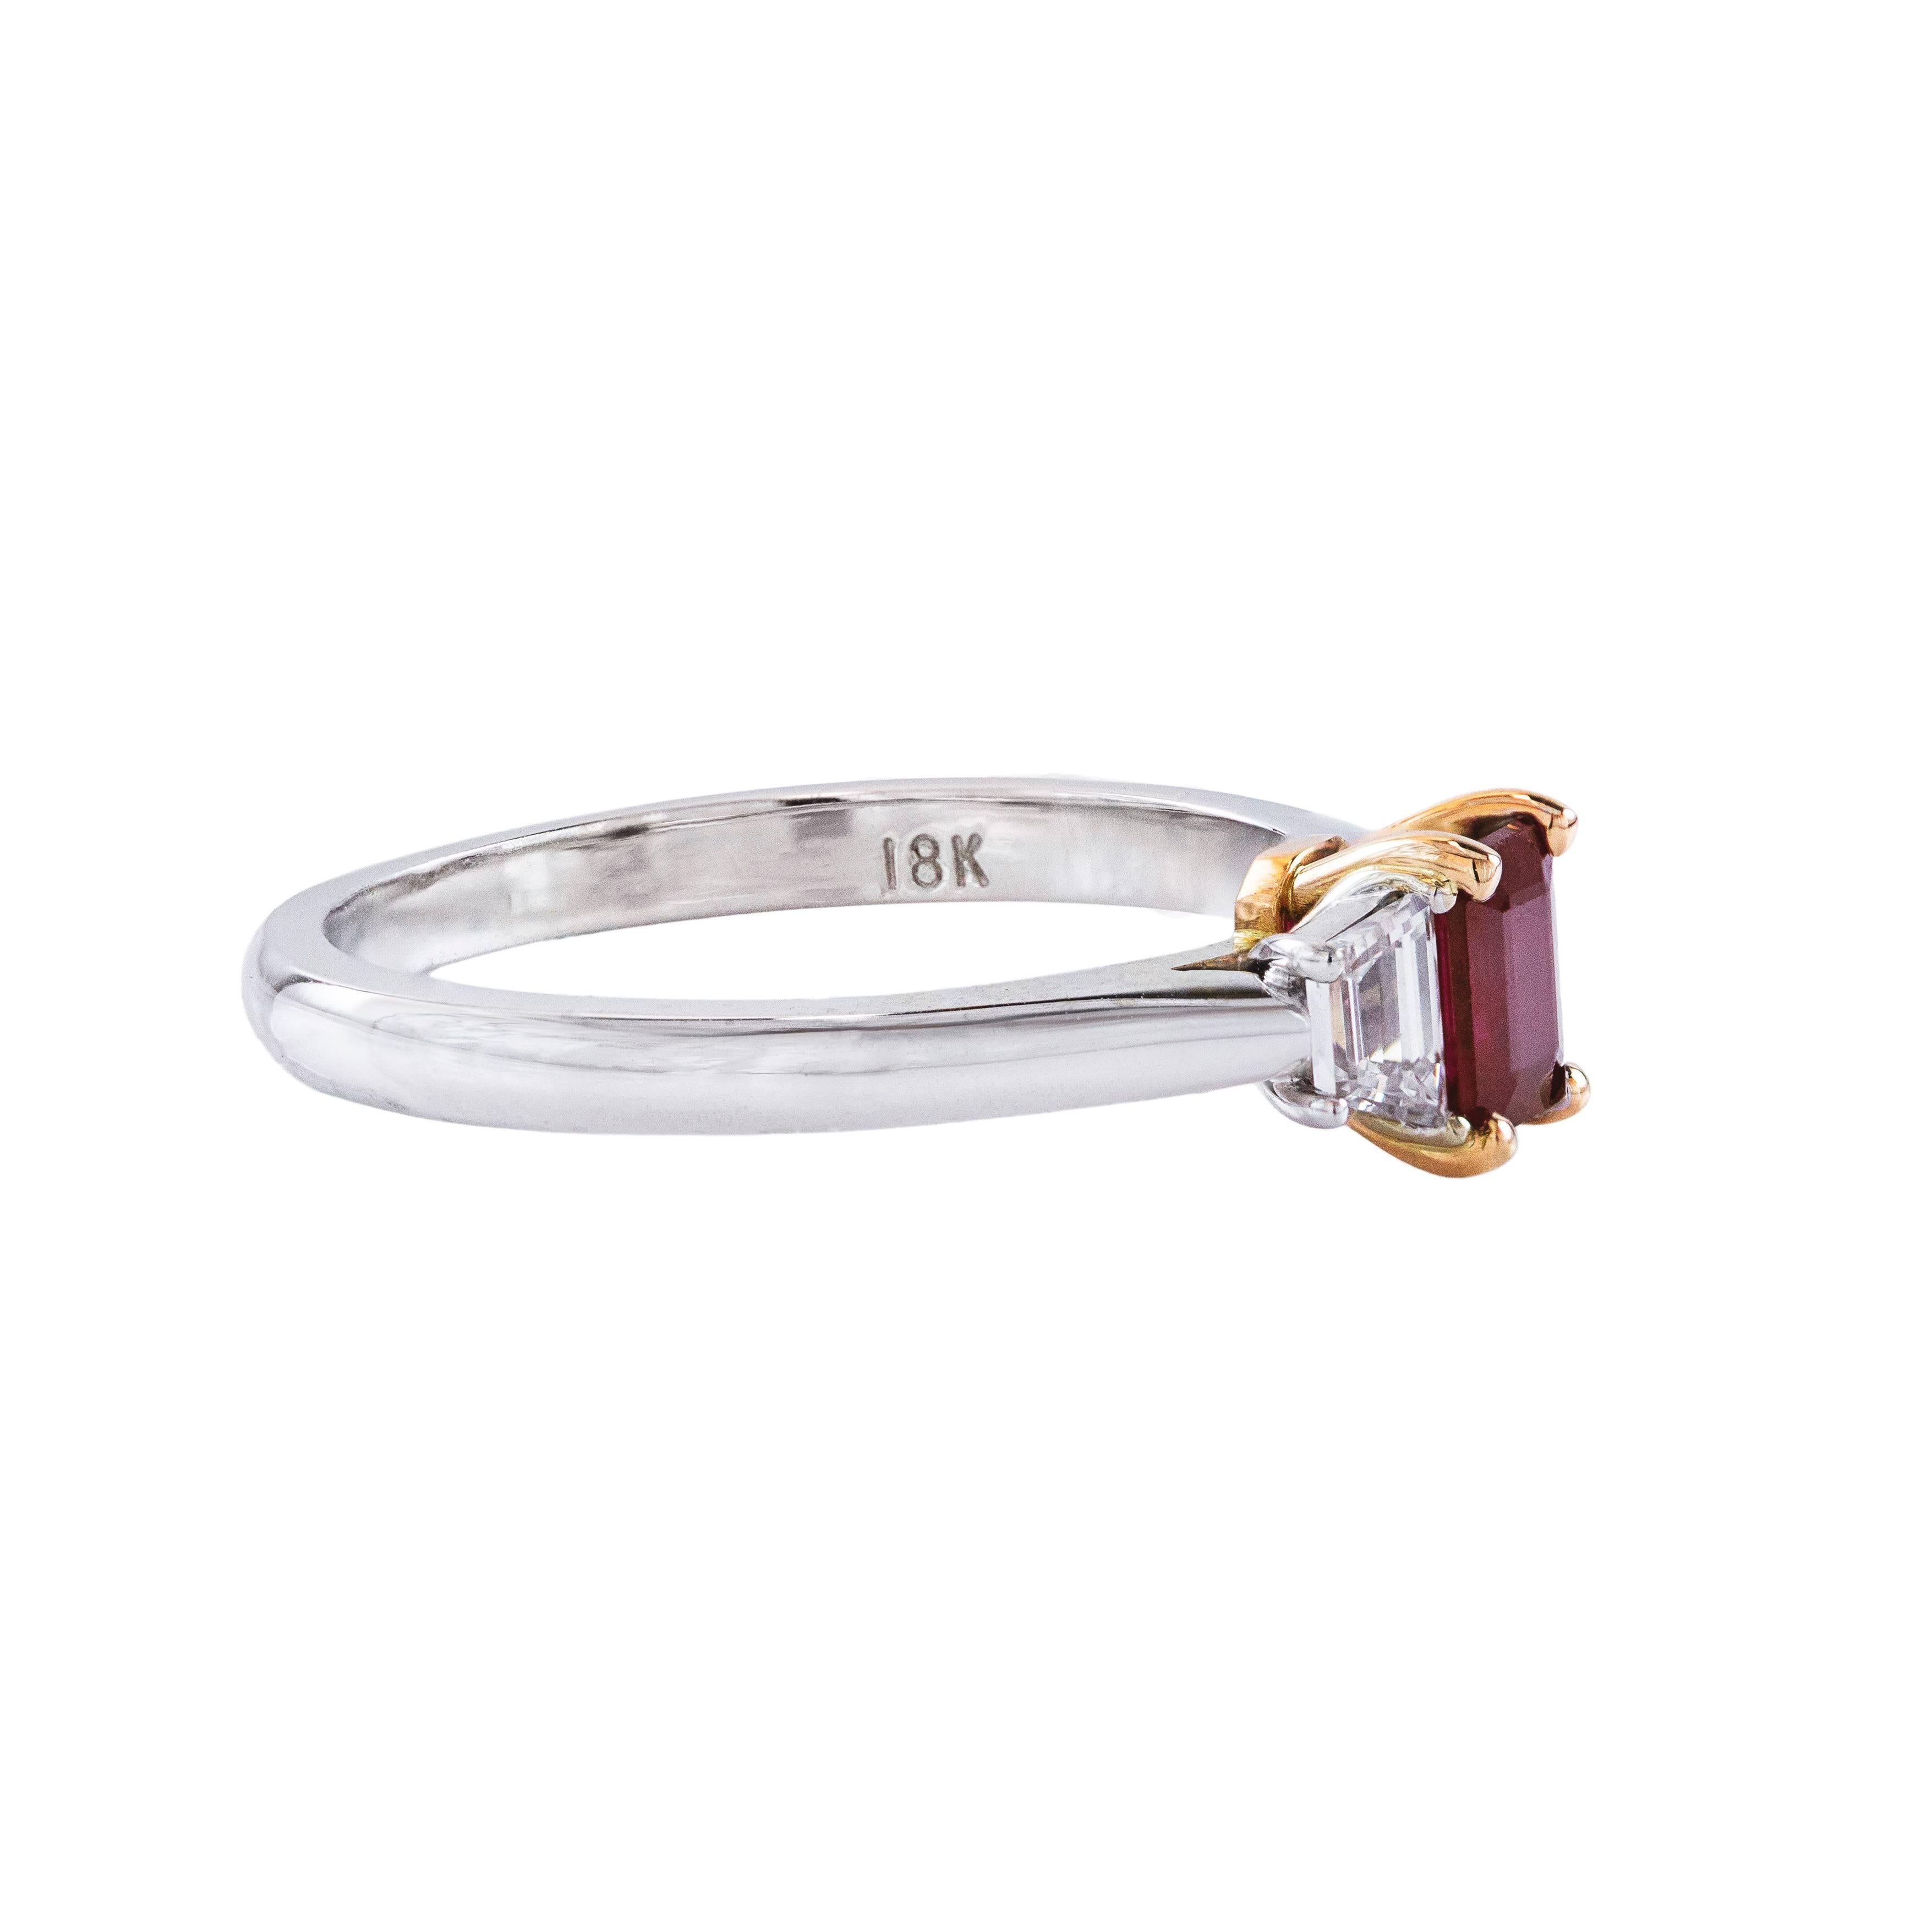 This ring features a gorgeous 0.47 carat emerald cut ruby with trapezoid cut diamond side stones weighing 0.26 carats. Set in 18k white gold. Size 6 1/4 (sizable). 

A simple but beautiful ring. 

Style available in different price ranges. Prices